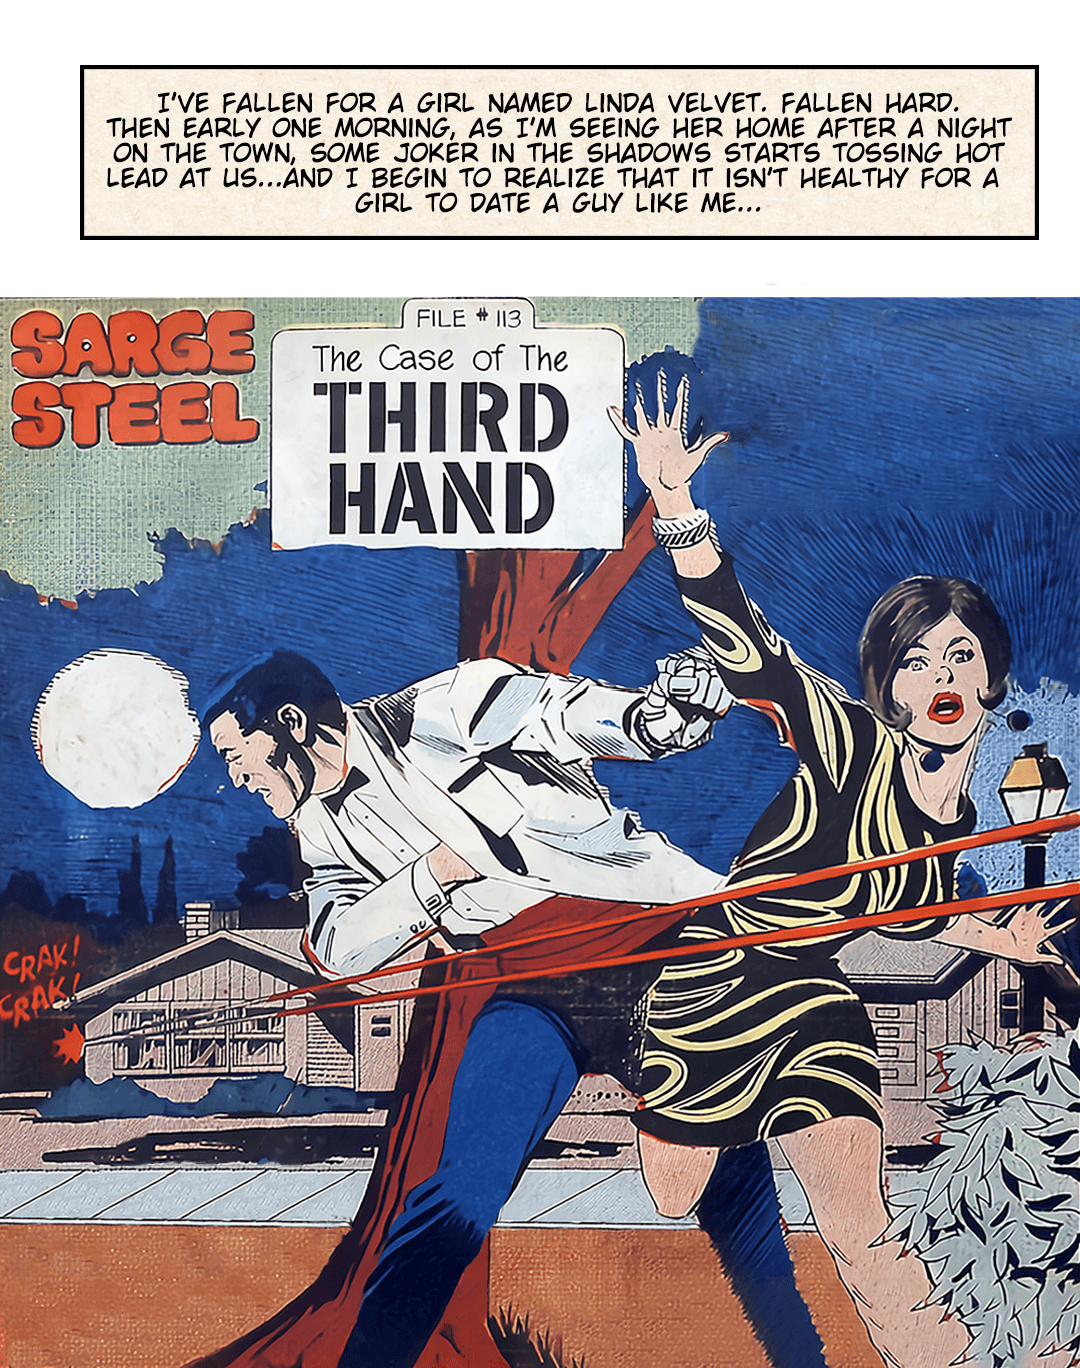 Case of the Third Hand #1 image number 2